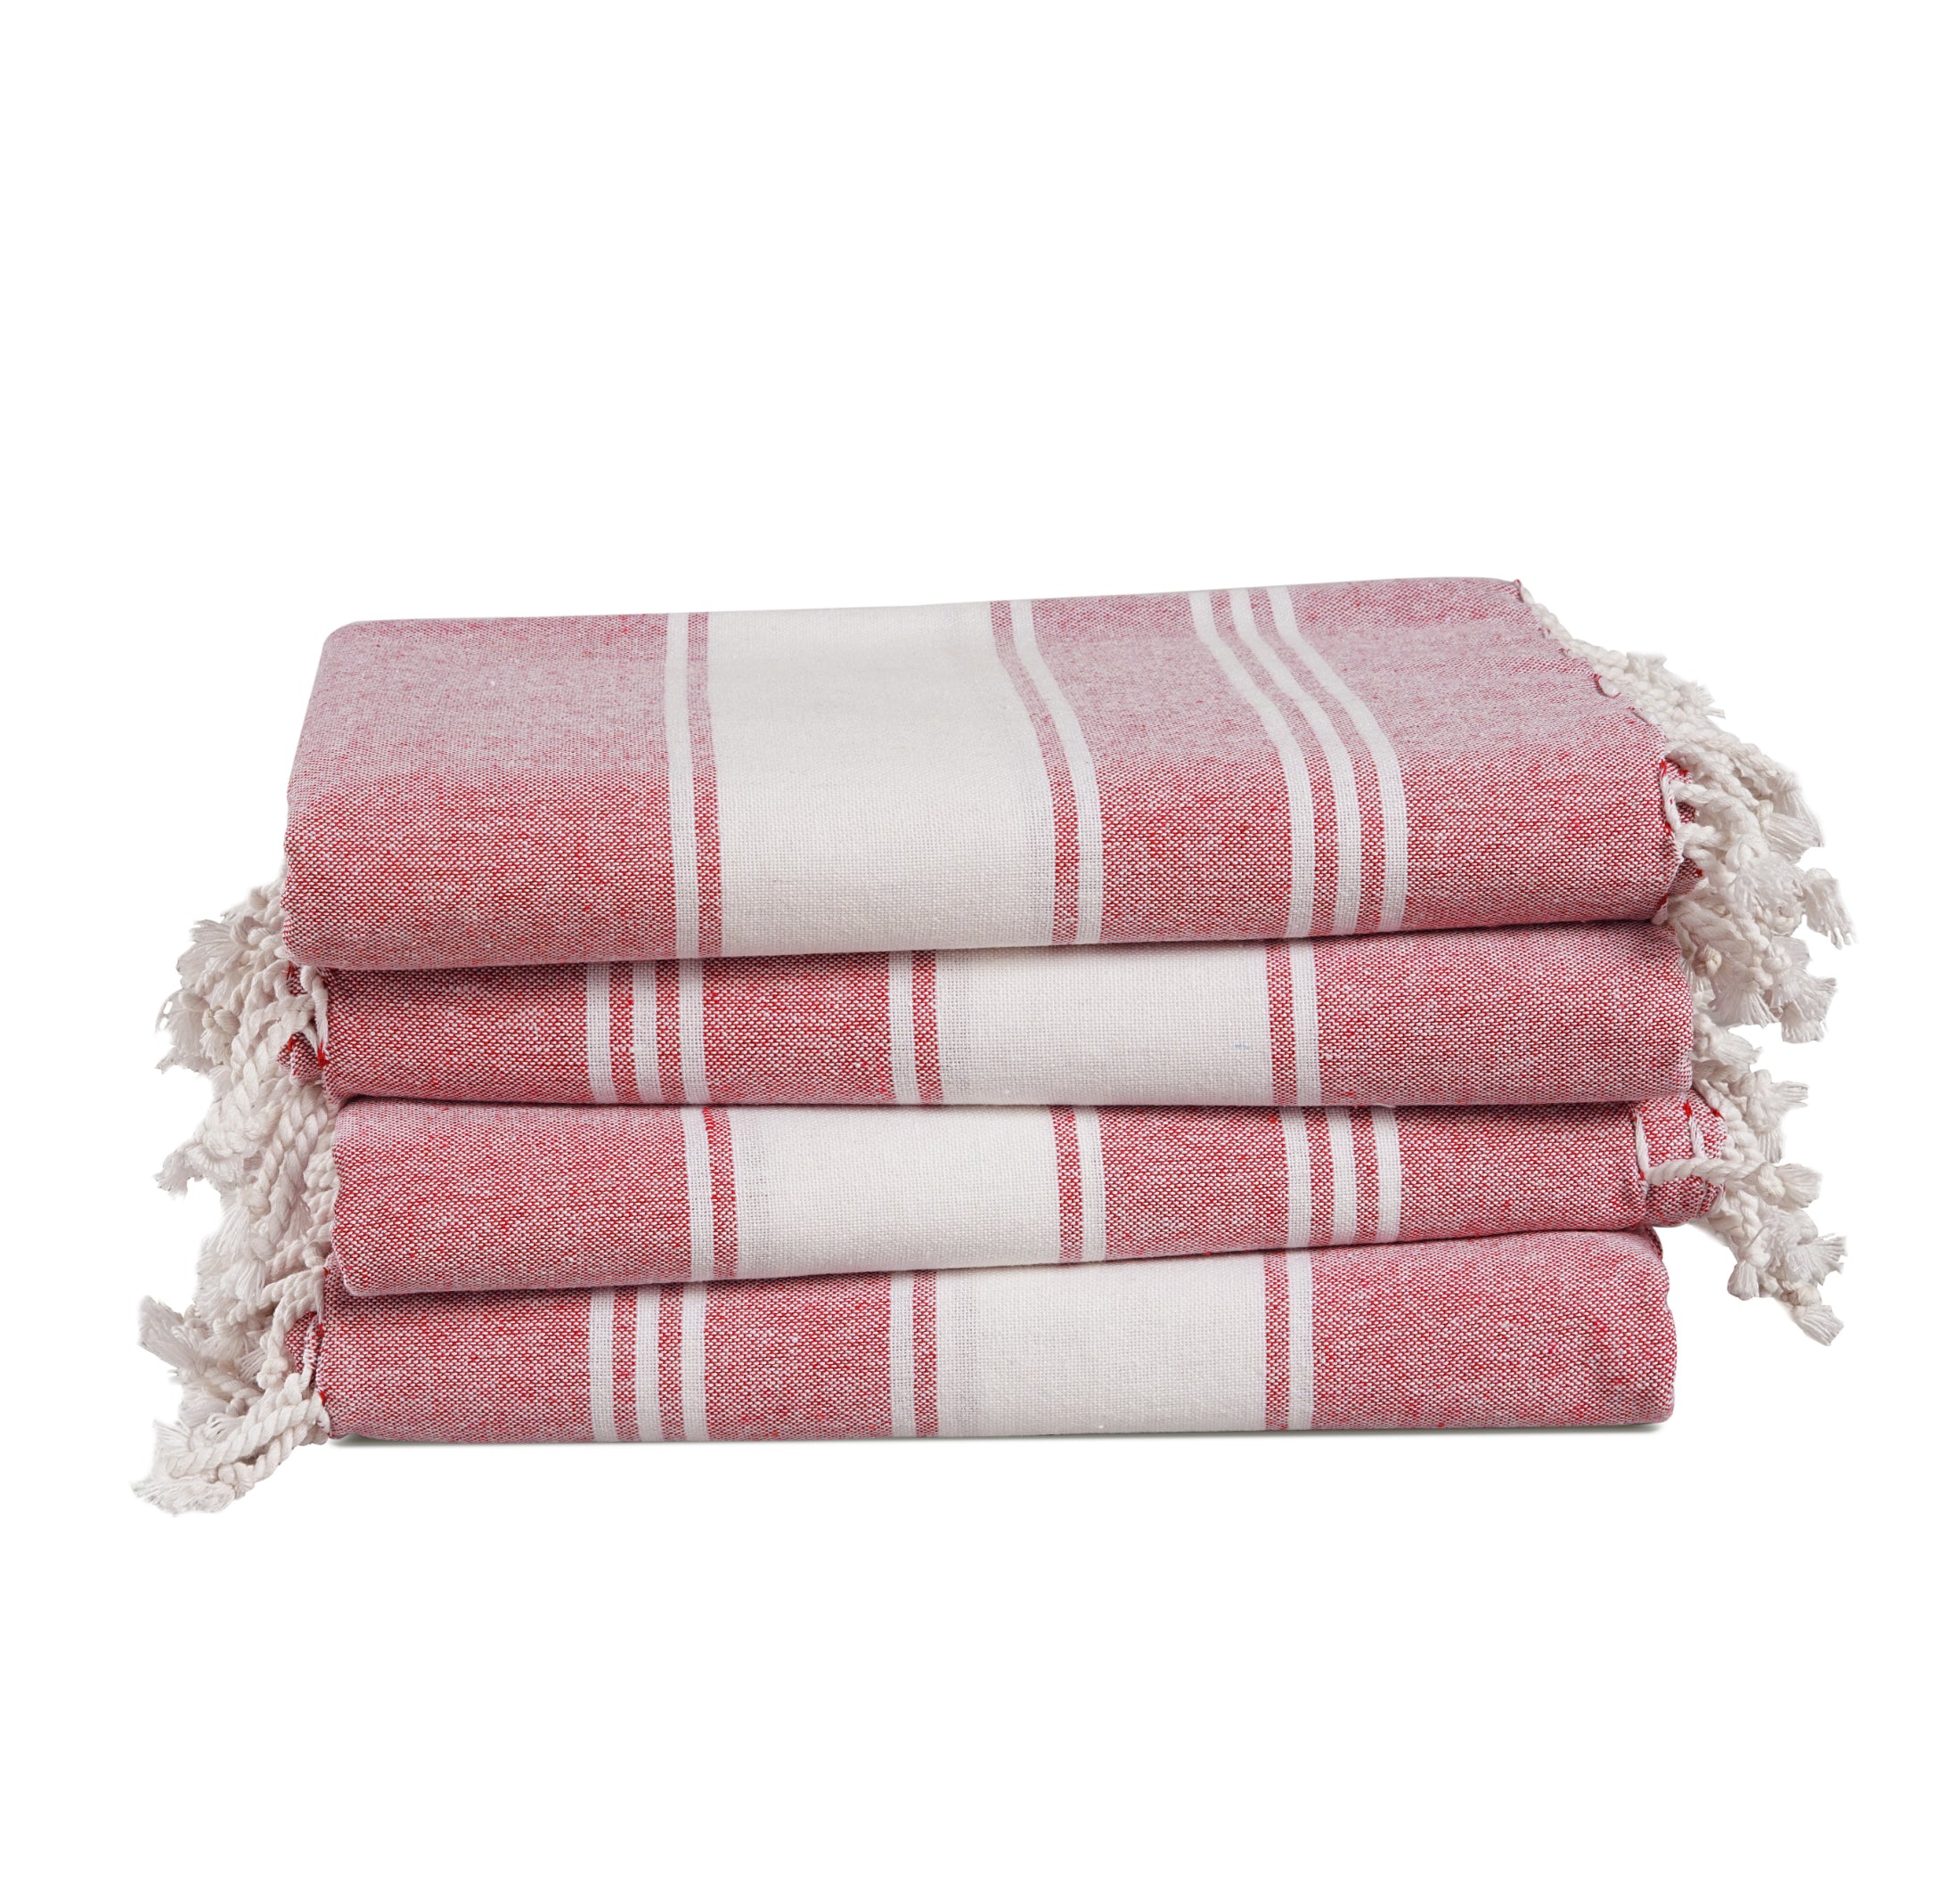 Set of 4 100% Cotton Chambray Turkish Beach Towels - Cashmere Rose